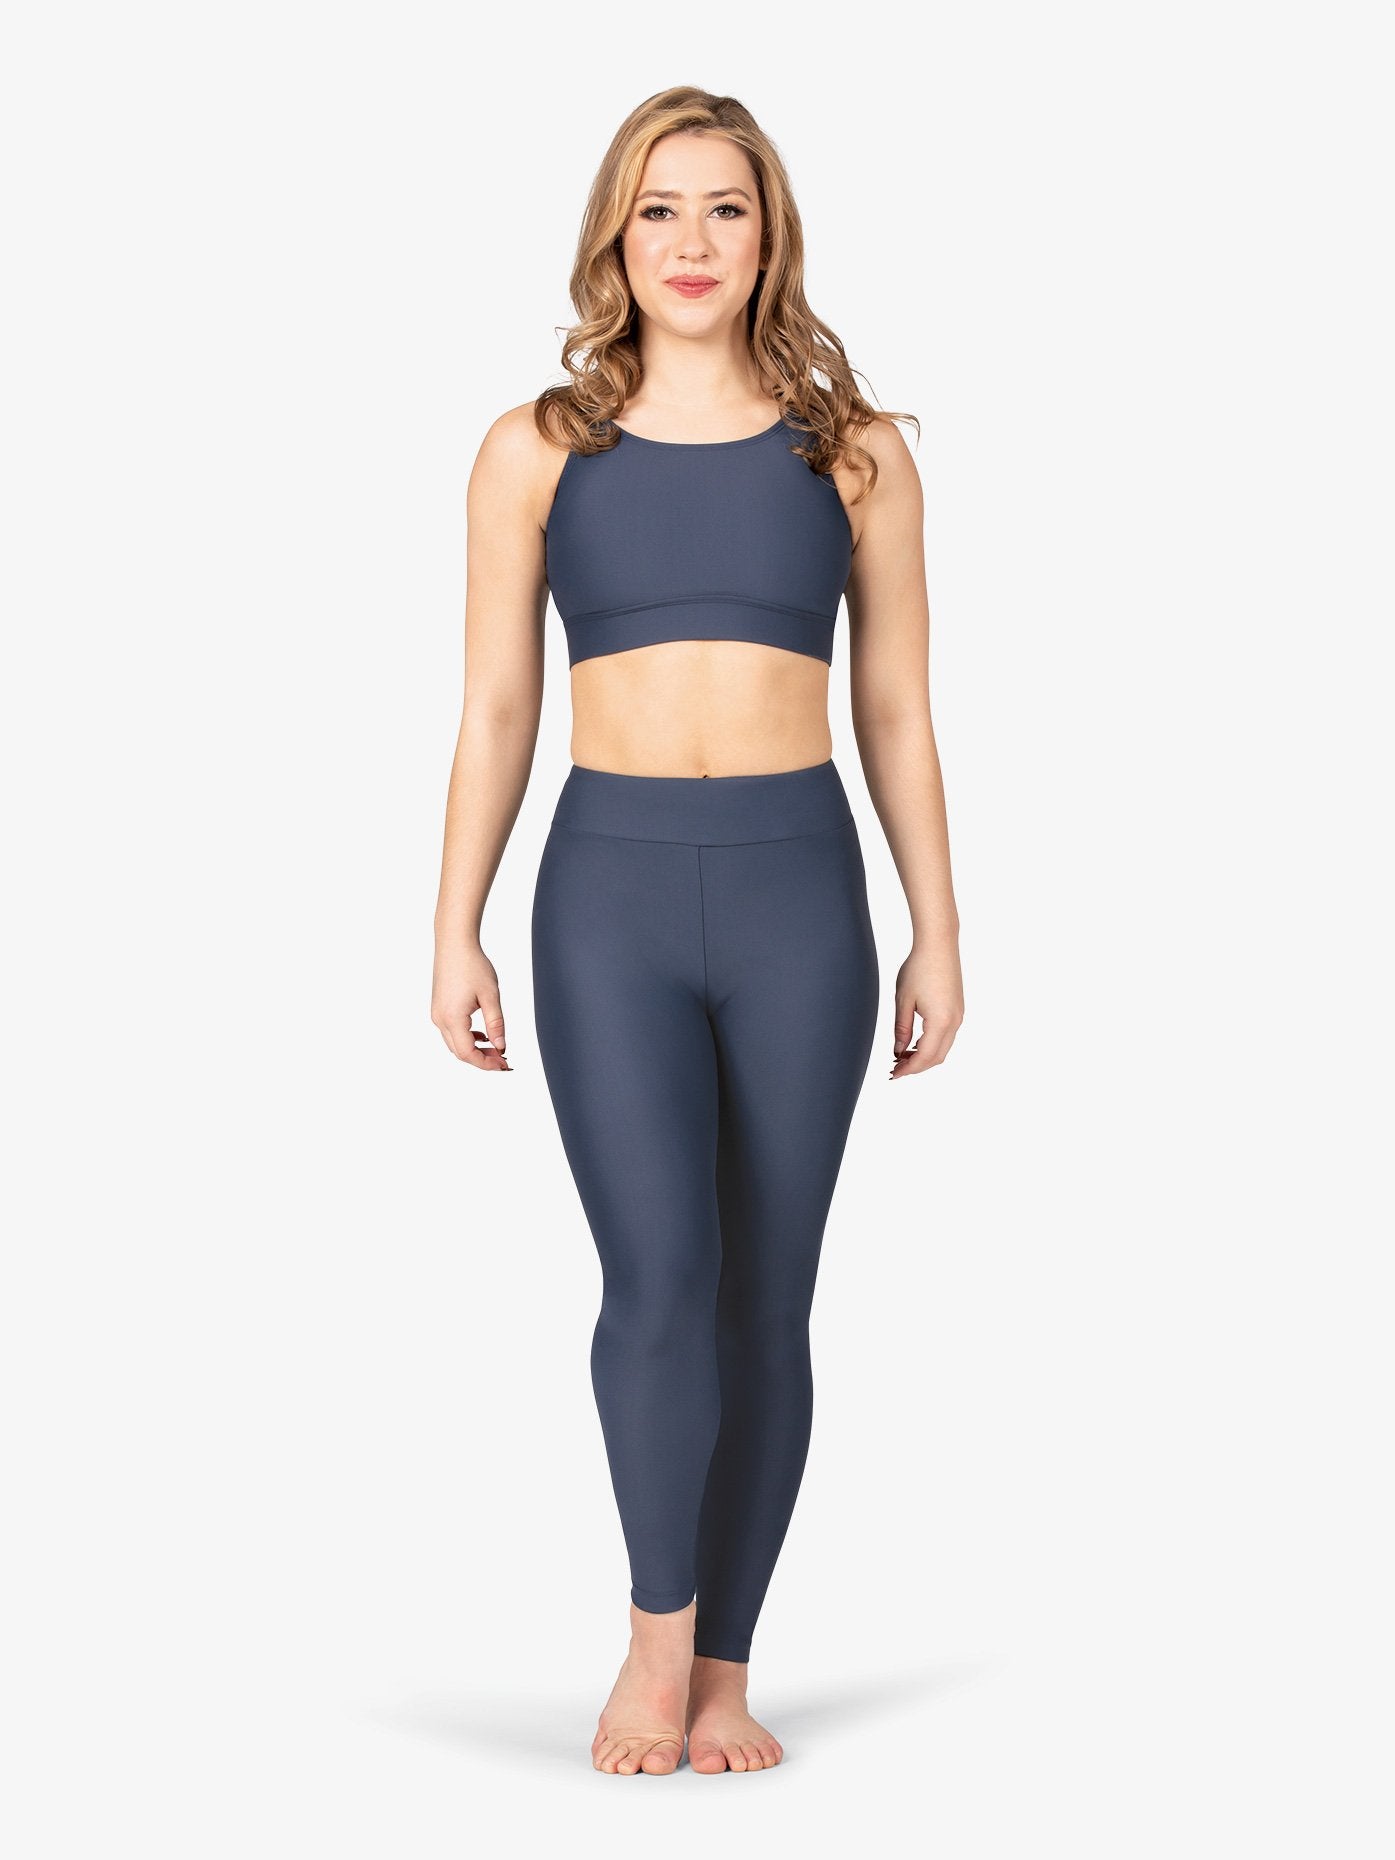 Women’s butter soft grey leggings offering comfort and style